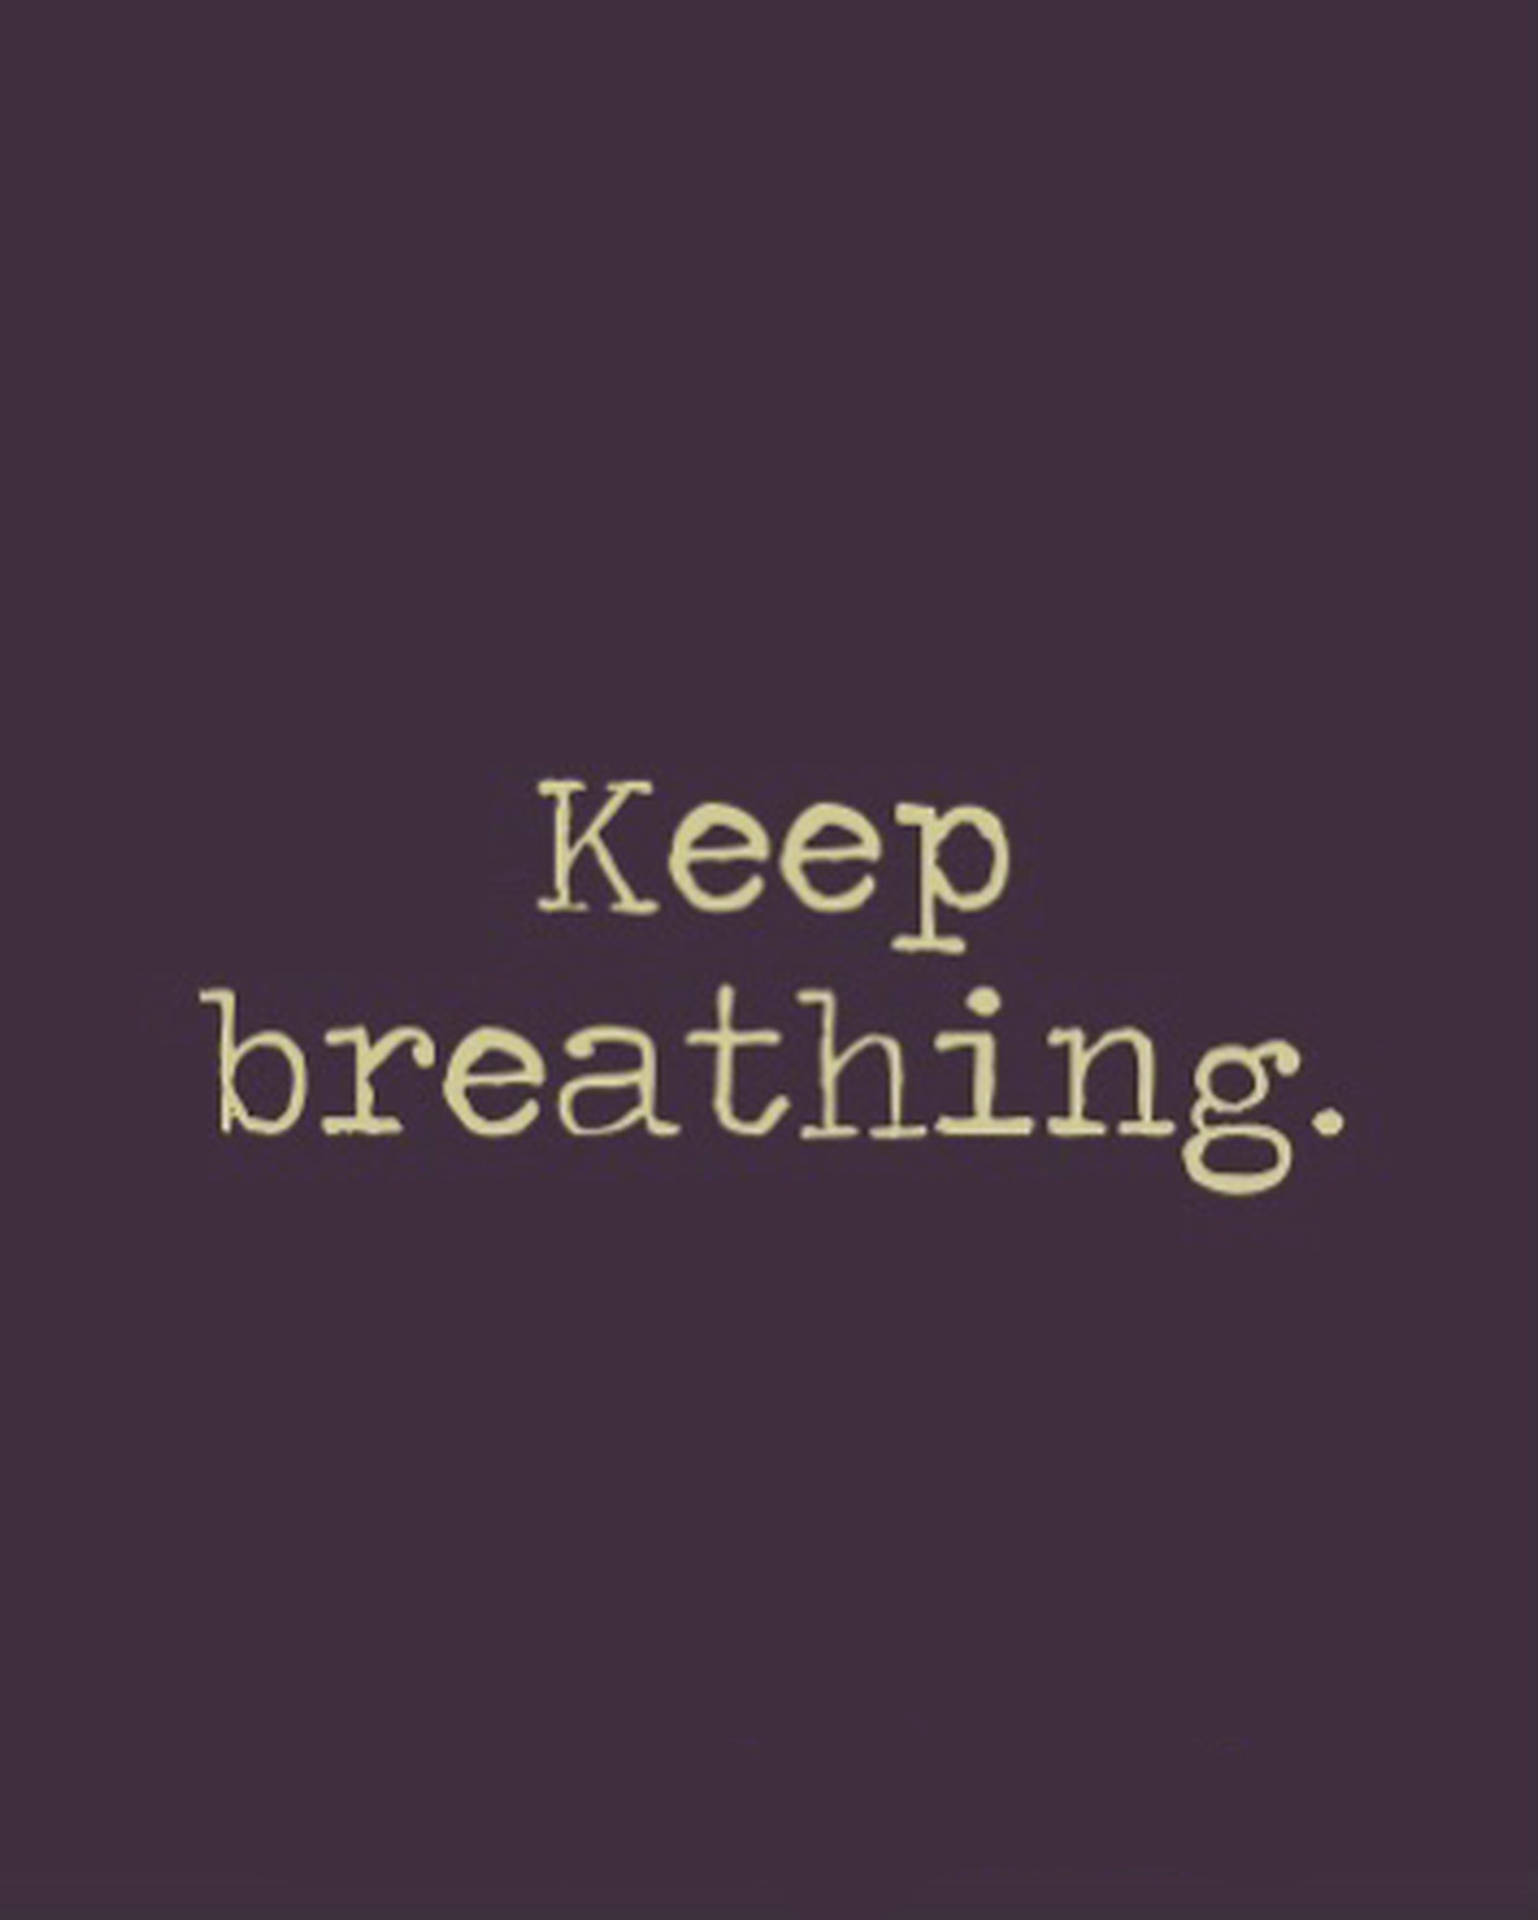 Keep Breathing Poster Background